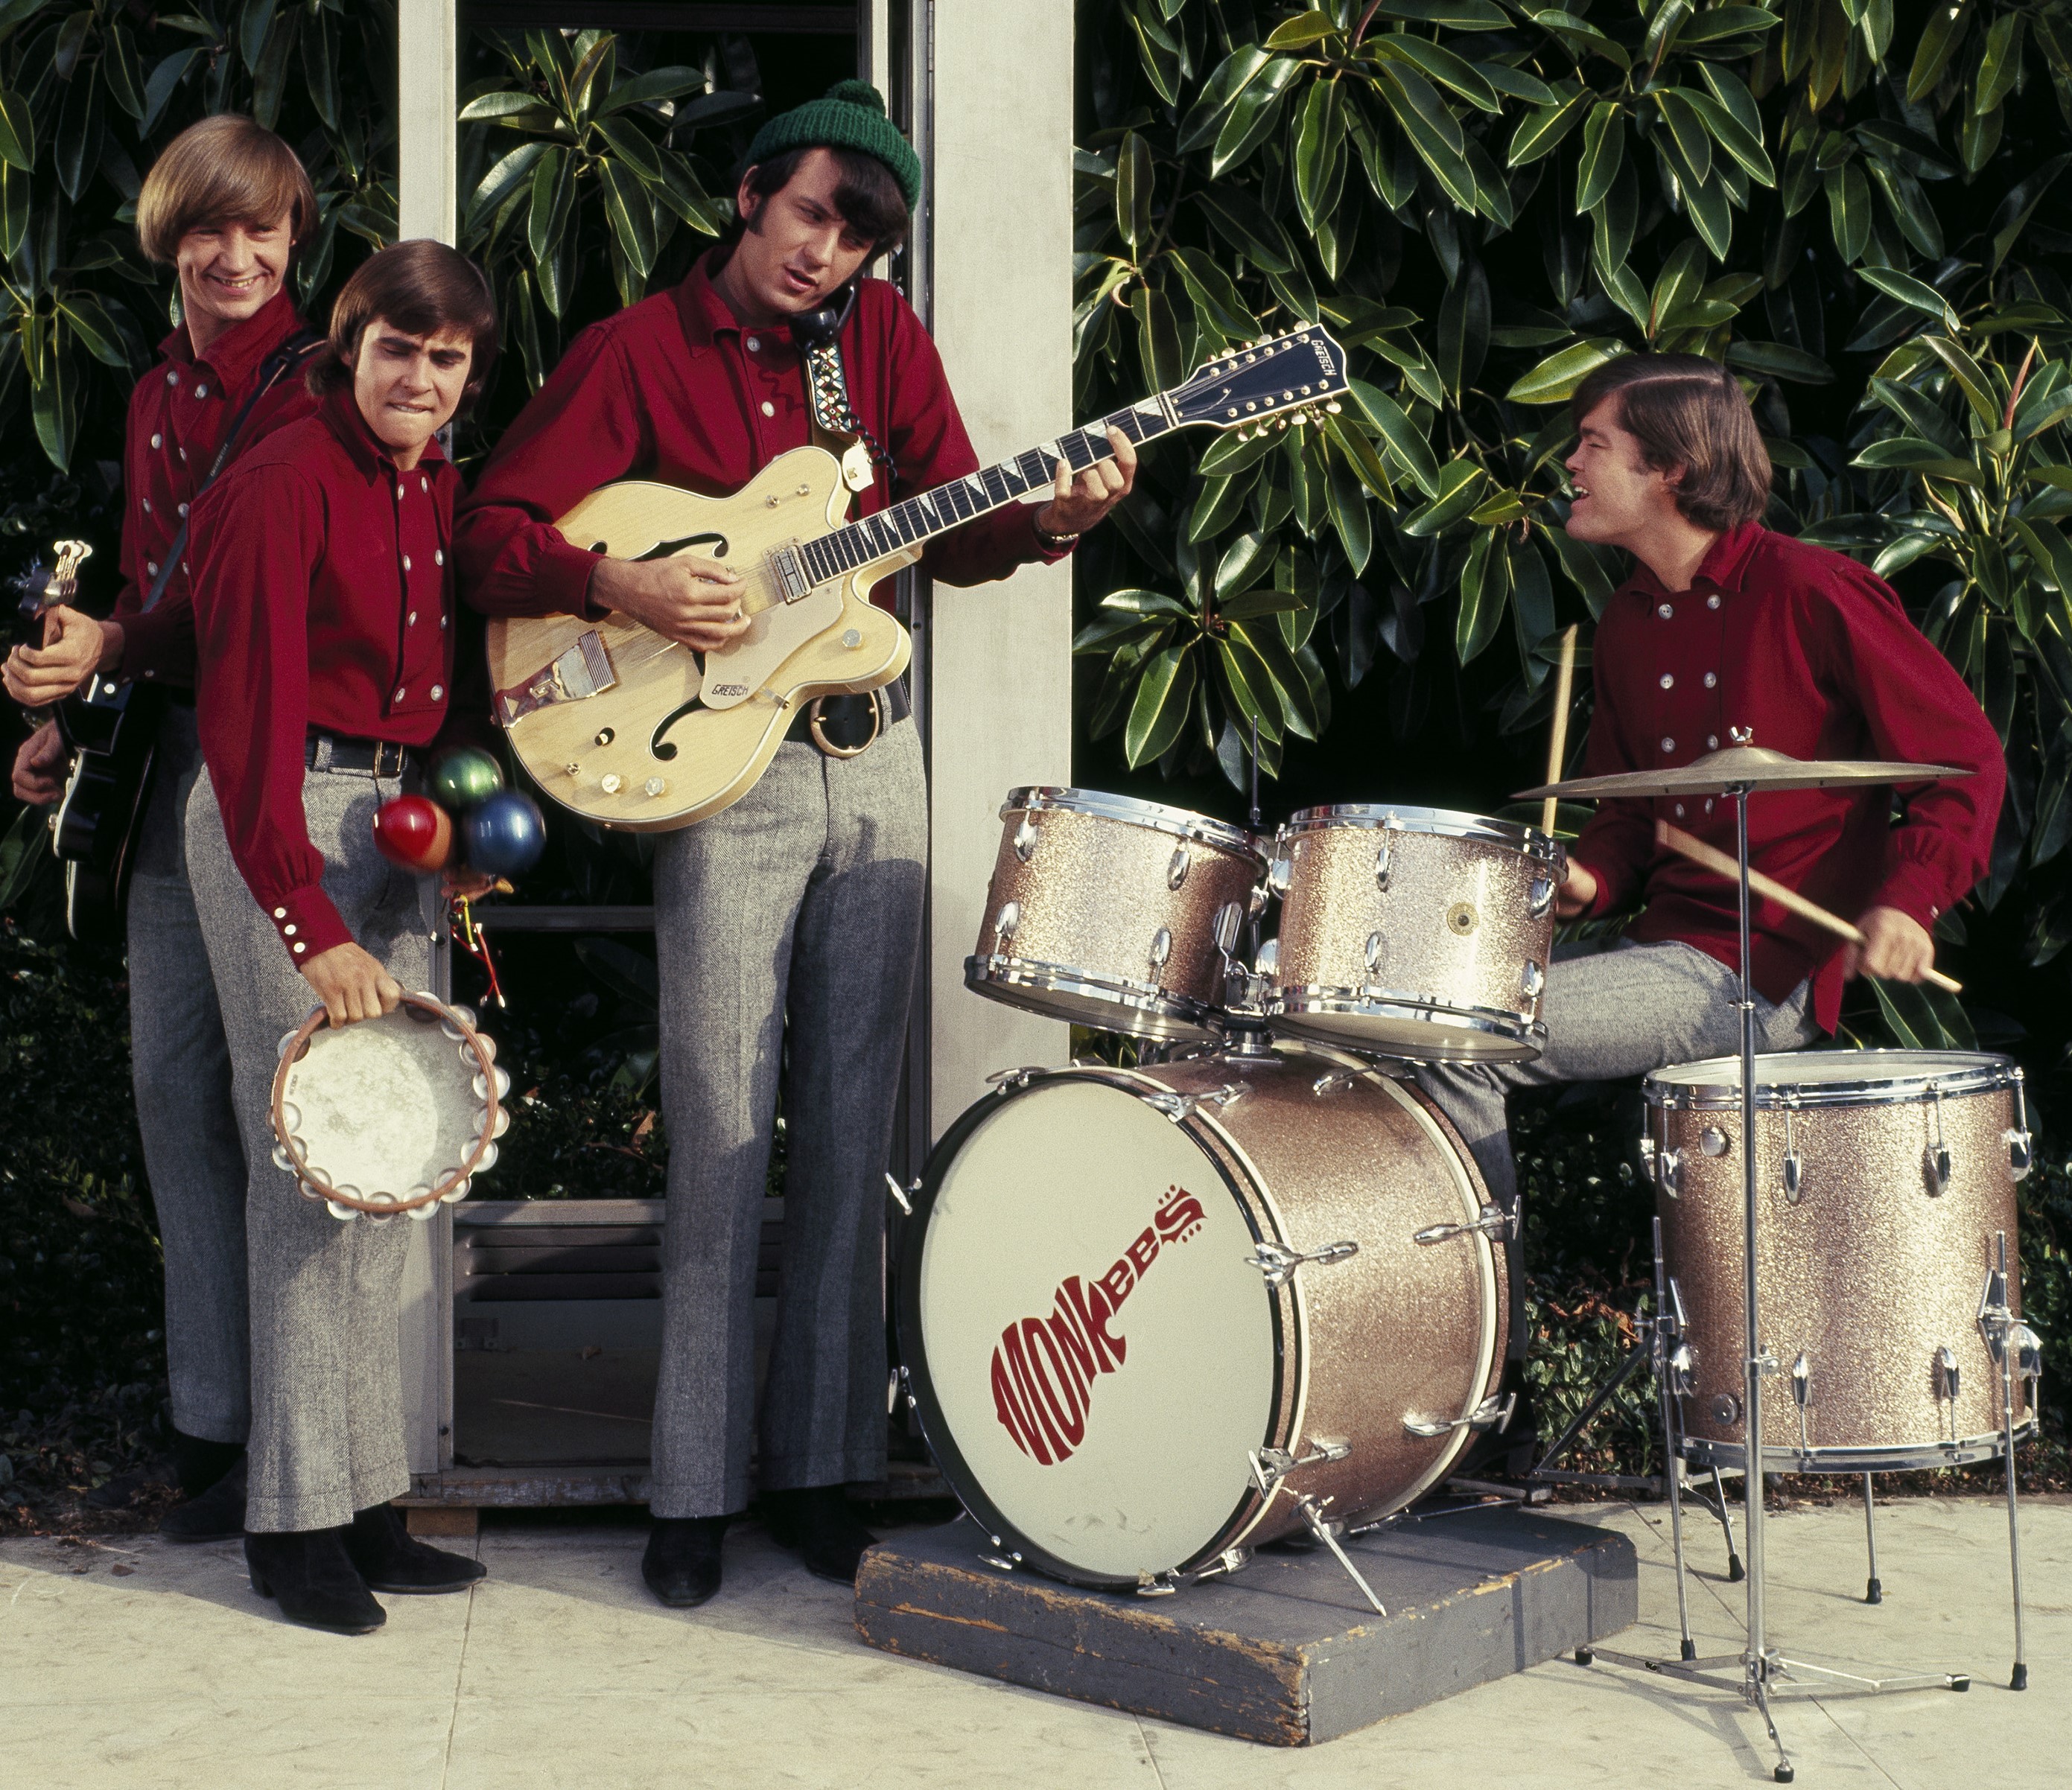 The Monkees’ Peter Tork, Davy Jones, Mike Nesmith, and Micky Dolenz wearing red